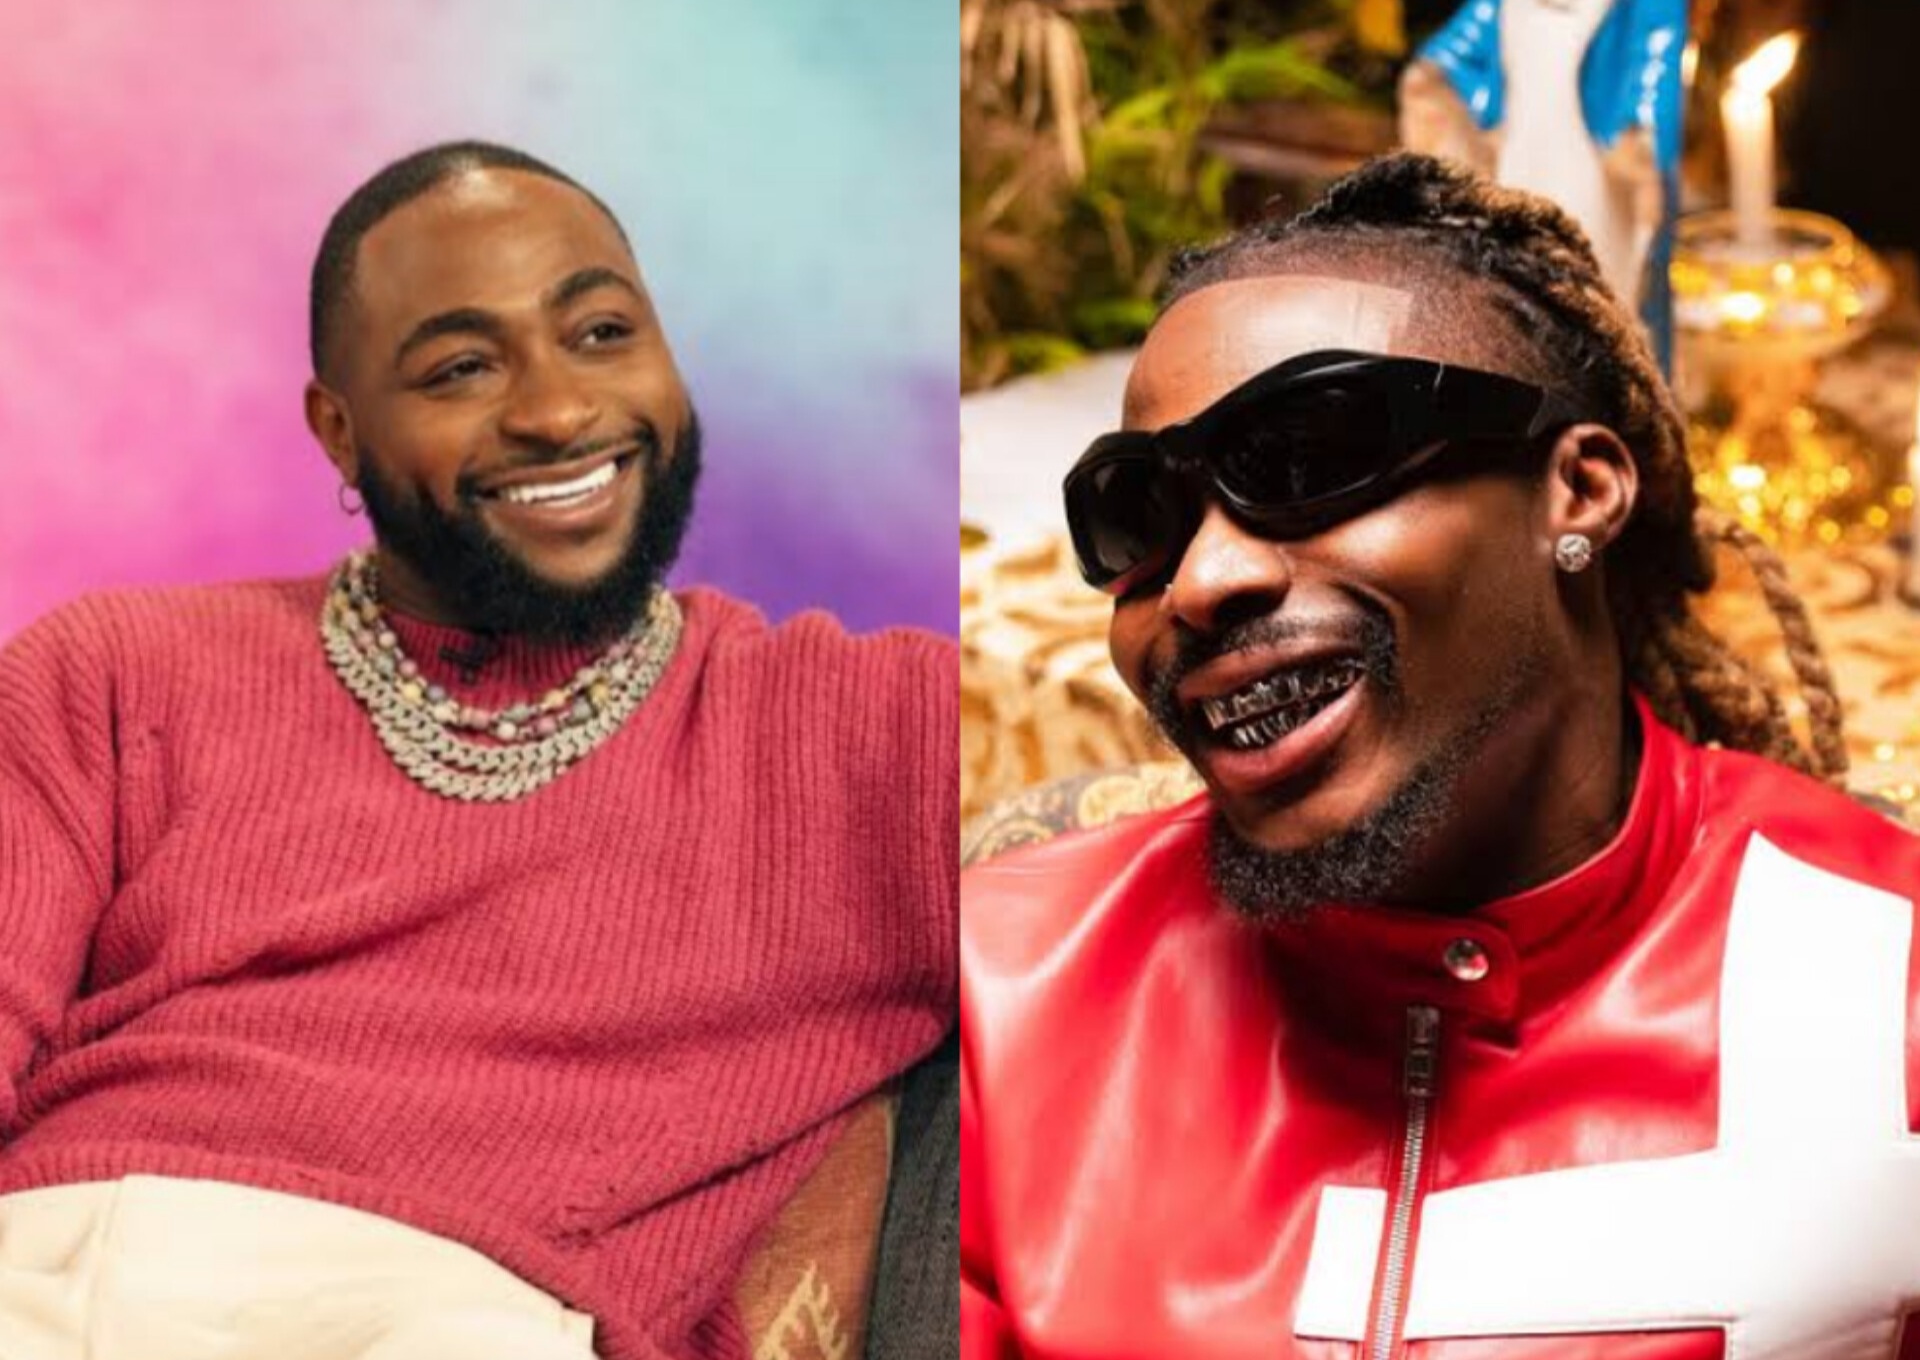 He want beg for music ni, Netizens React as Asake Praises Davido for Supportive Gestures"